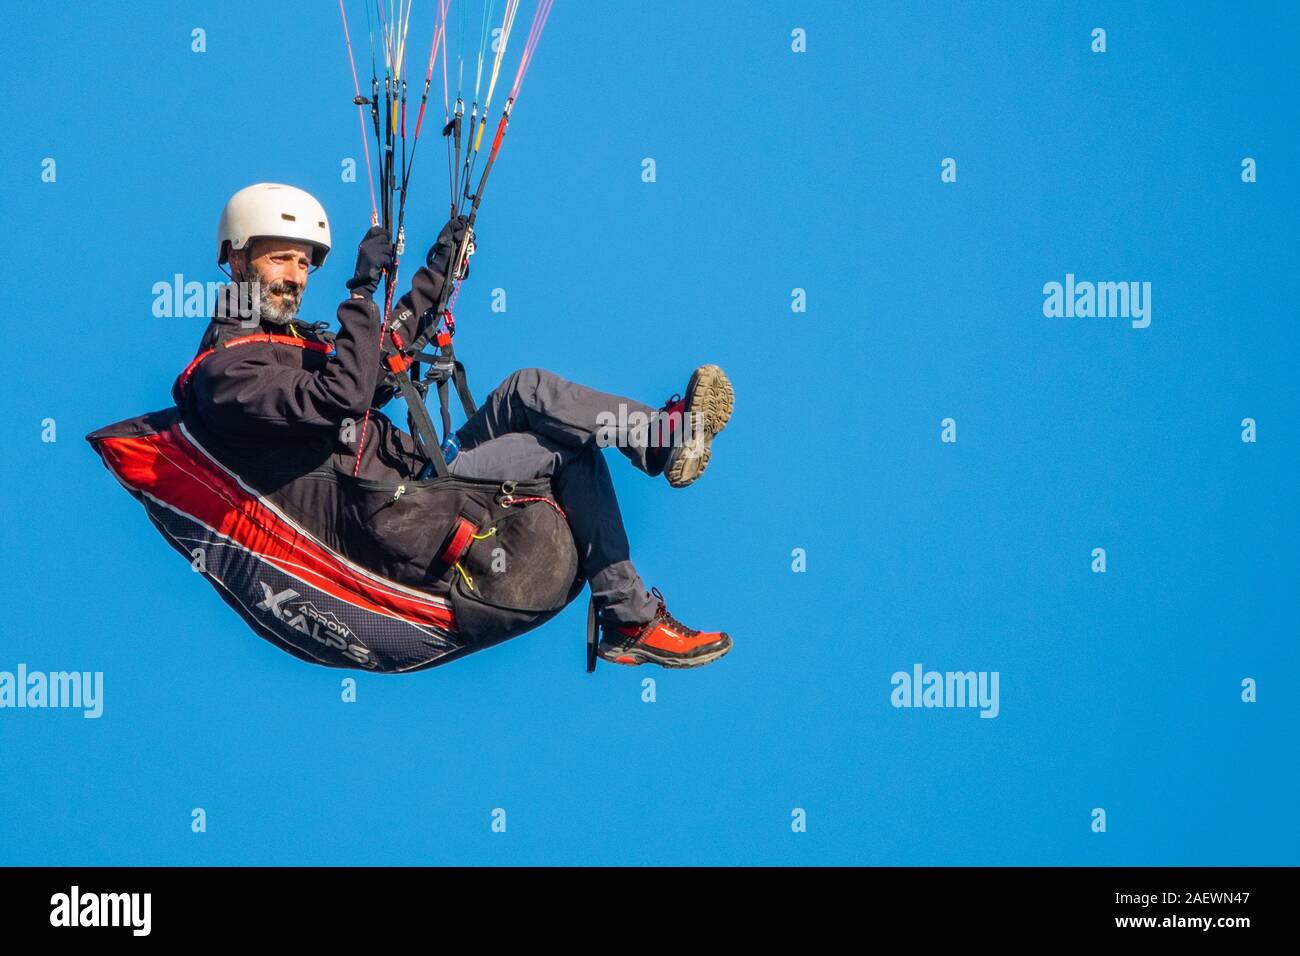 Bearded man seated in a paragliding rig in flight, full frame blue sky background, copy space Stock Photo